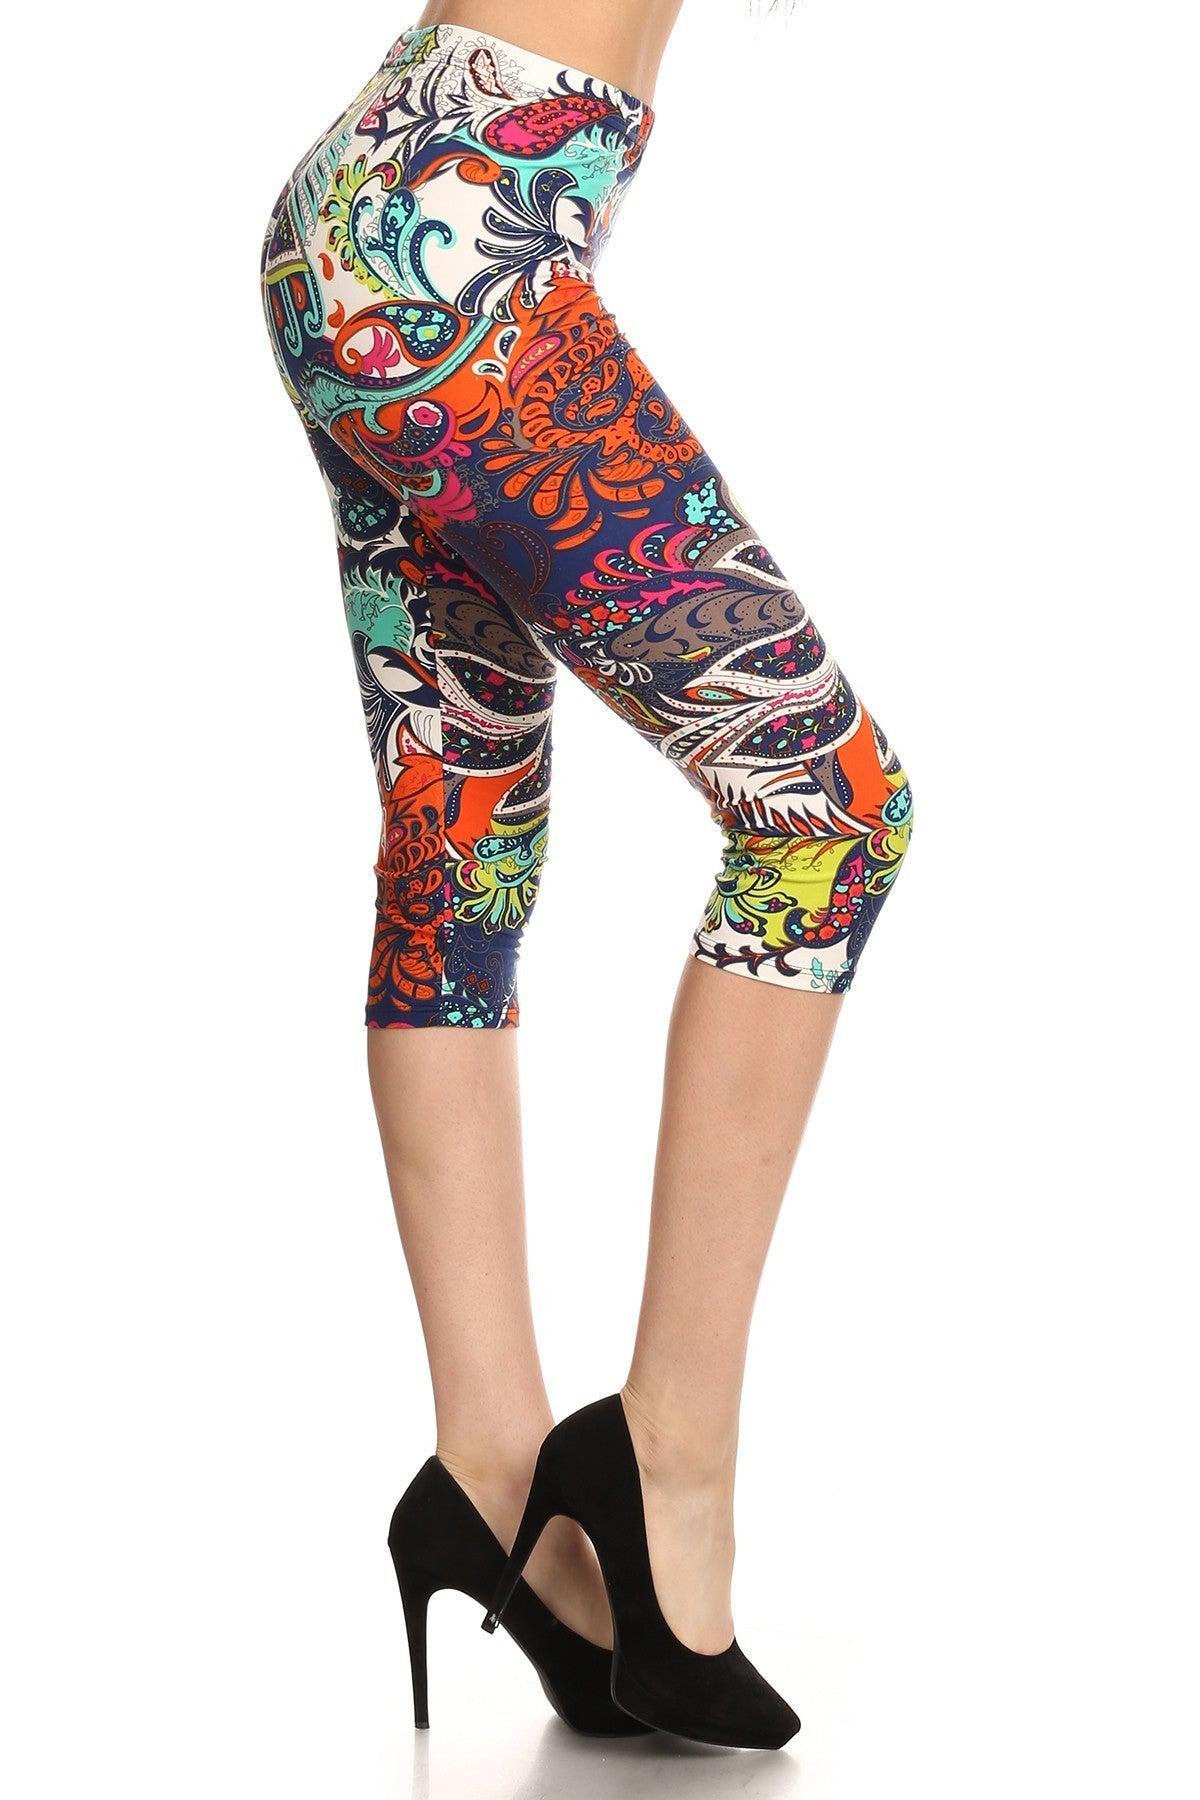 Multi-color Ornate Print Cropped Length Fitted Leggings With High Elastic Waist. Blue Zone Planet